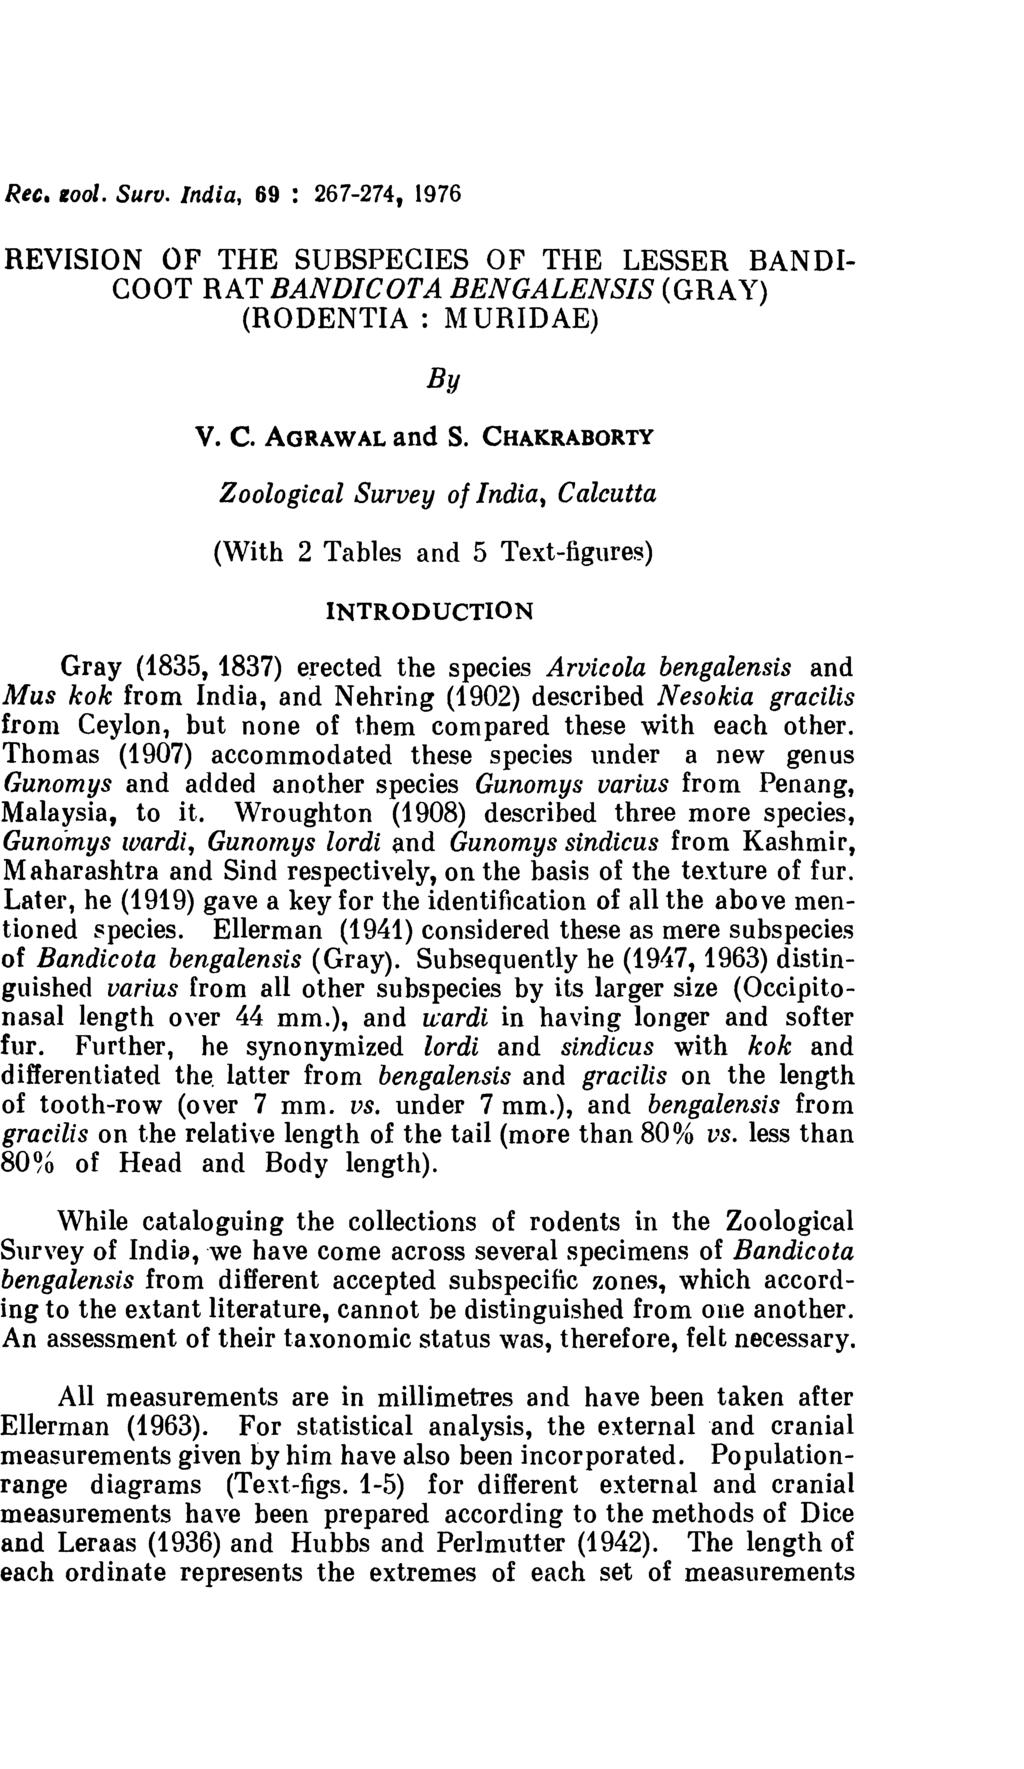 Ree. 1001. Surv. India, 69 : 267-274, 1976 REVISION OF THE SUSPECIES OF TI-IE LESSER NDI COOT RT ND/COT ENGLENSIS (GRY) (RODENTI: MURIDE) y v. C. GRWL and S.